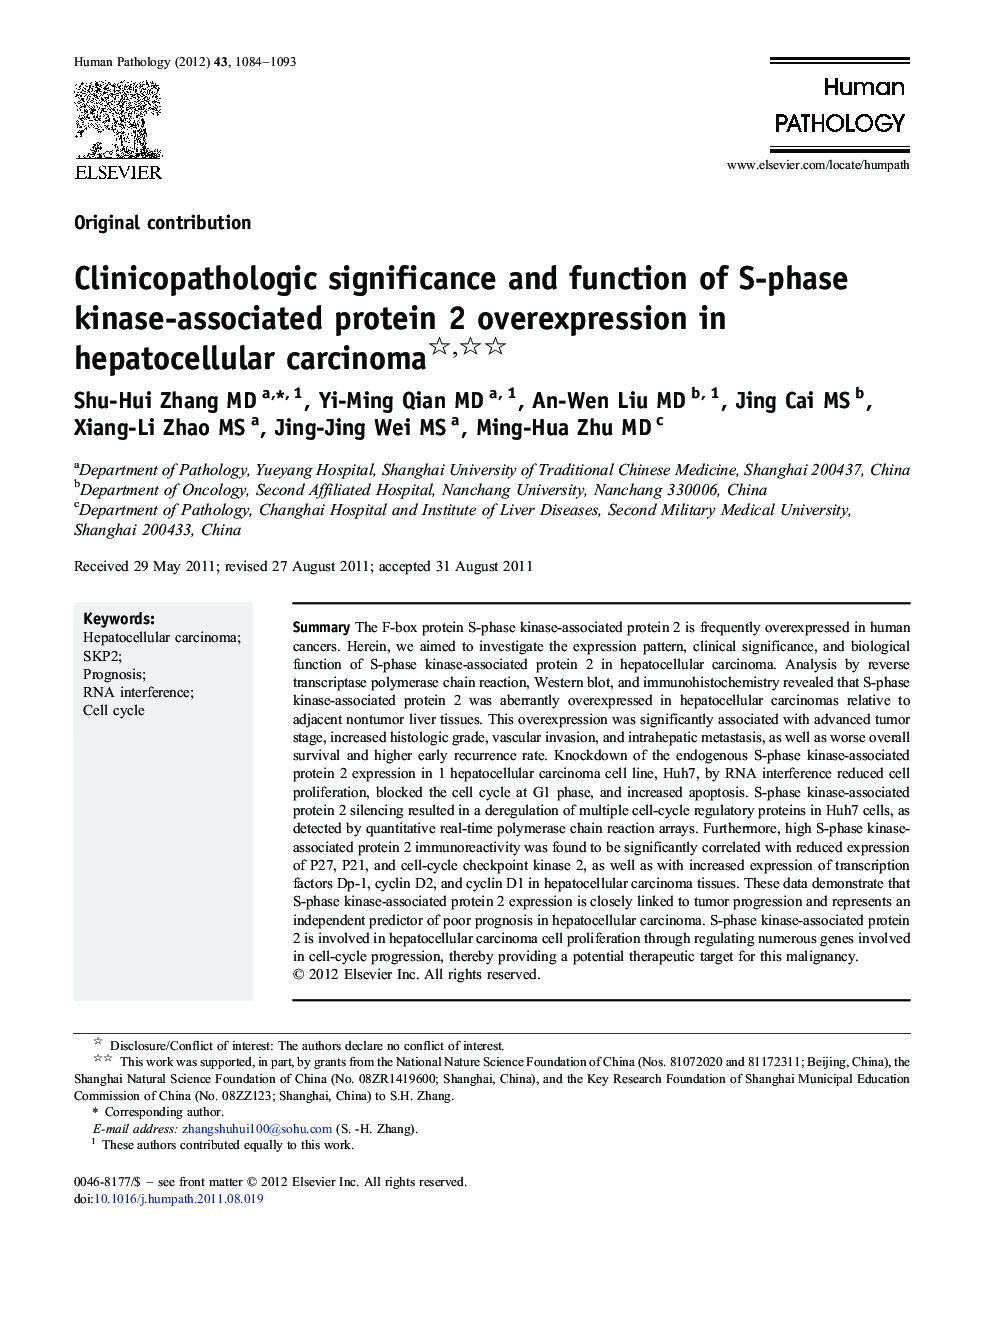 Clinicopathologic significance and function of S-phase kinase-associated protein 2 overexpression in hepatocellular carcinoma